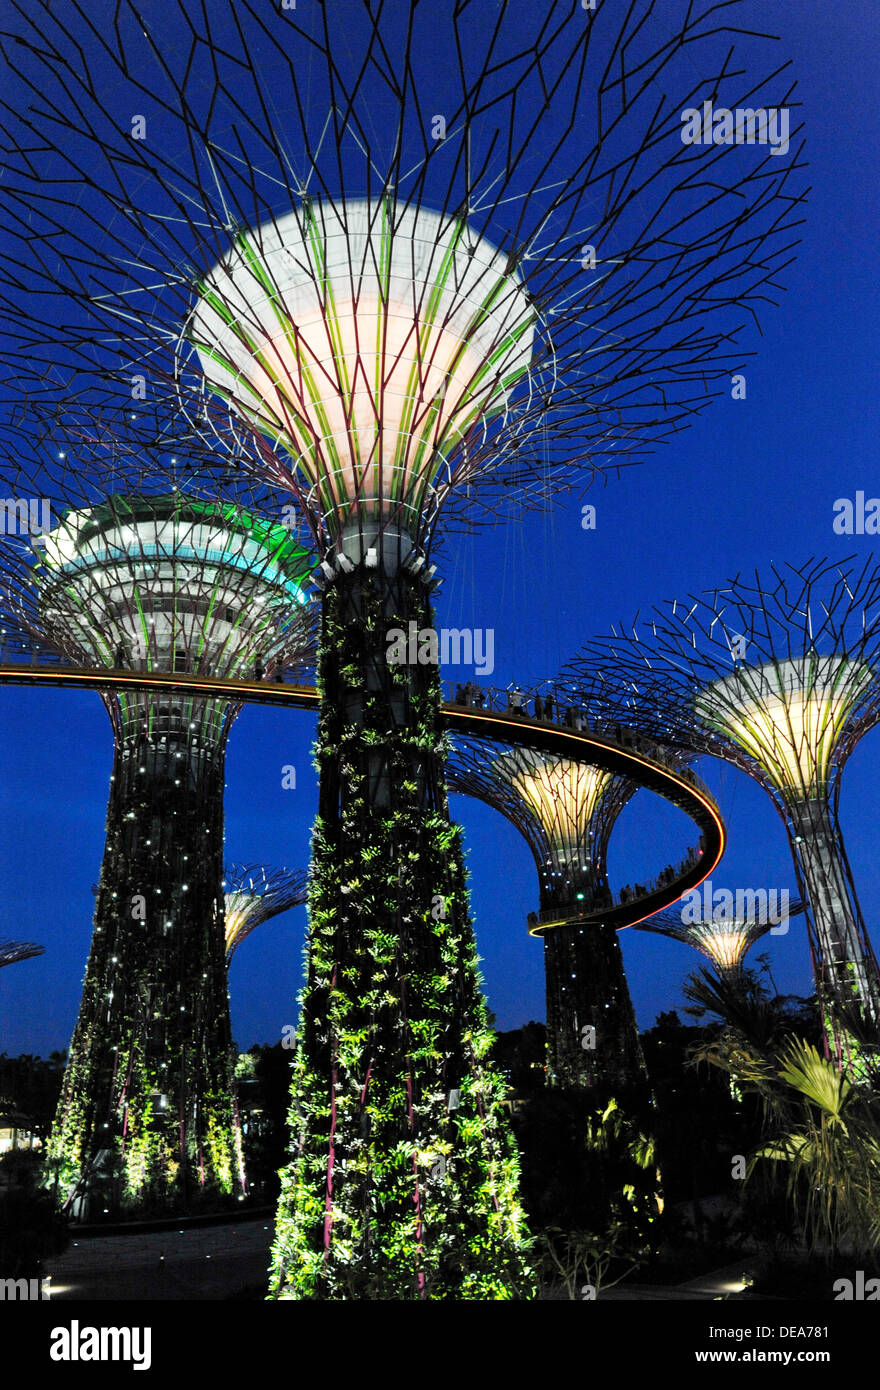 Singapore Tourist Attractions - Supertrees at Gardens by the Bay Stock Photo